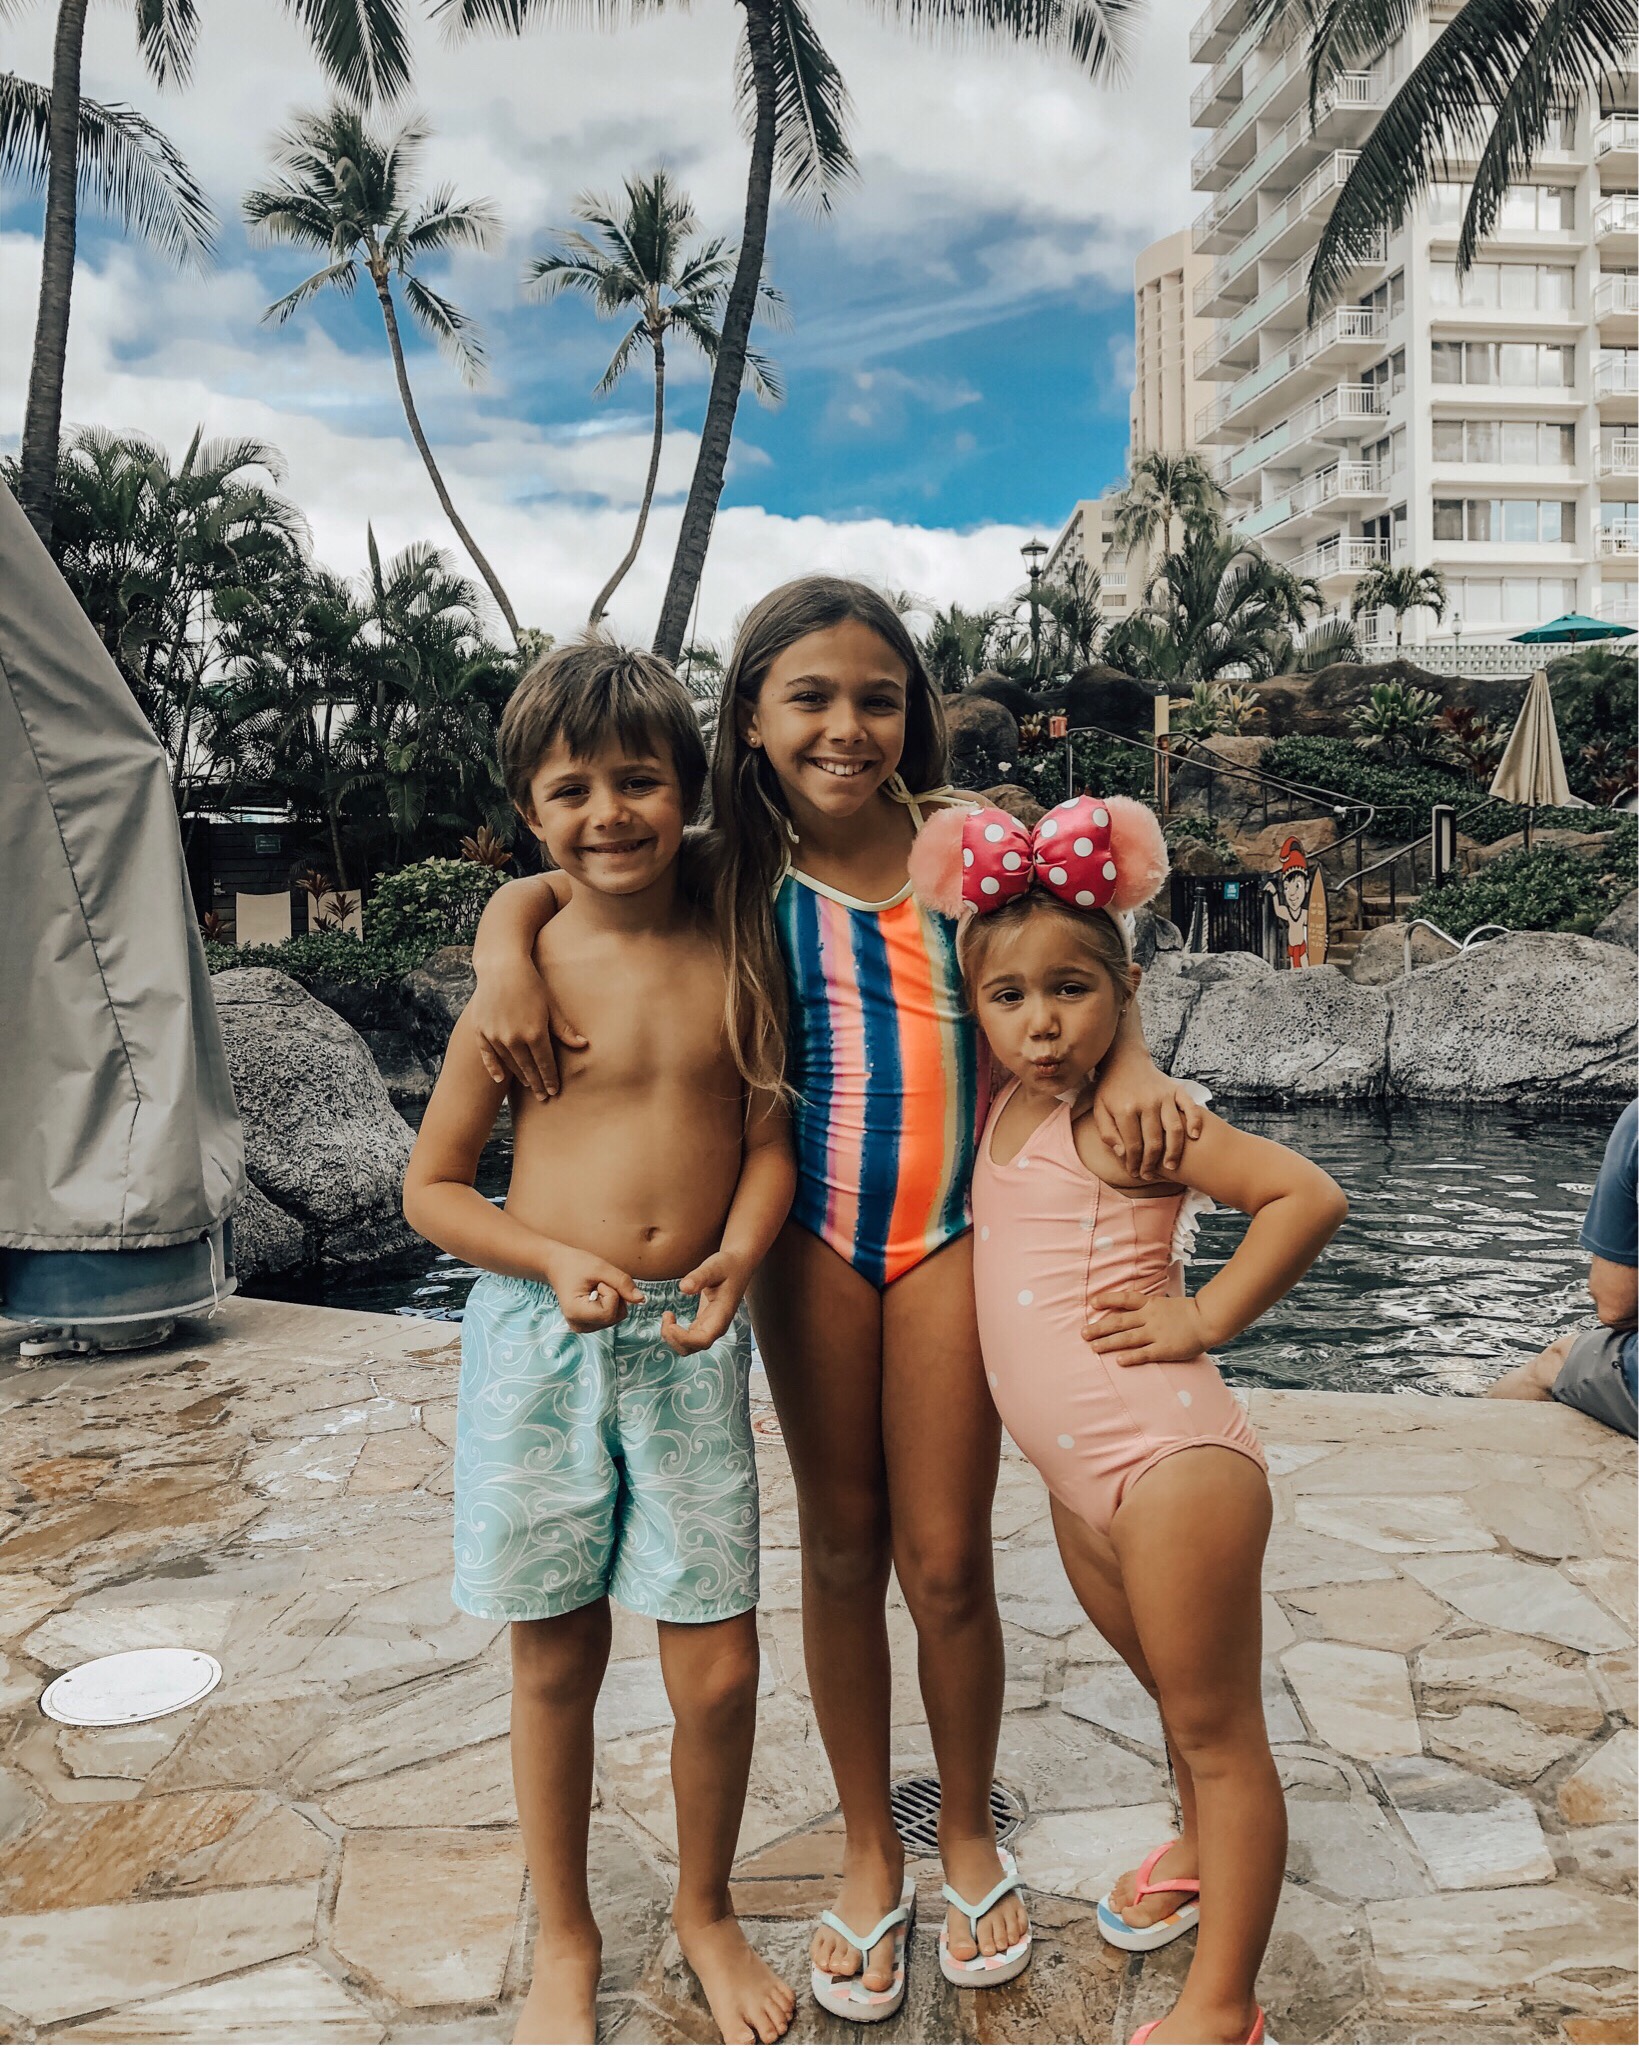 LIVING THE HAWAII LIFE- WHERE WE STAYED, WHAT WE DID AND WHAT I WORE- Jaclyn De Leon Style + Looking for Hawaii vacation travel ideas and tips? Giving all the details of our latest vacation including vacation beach style, family friendly activities, and hotel details.